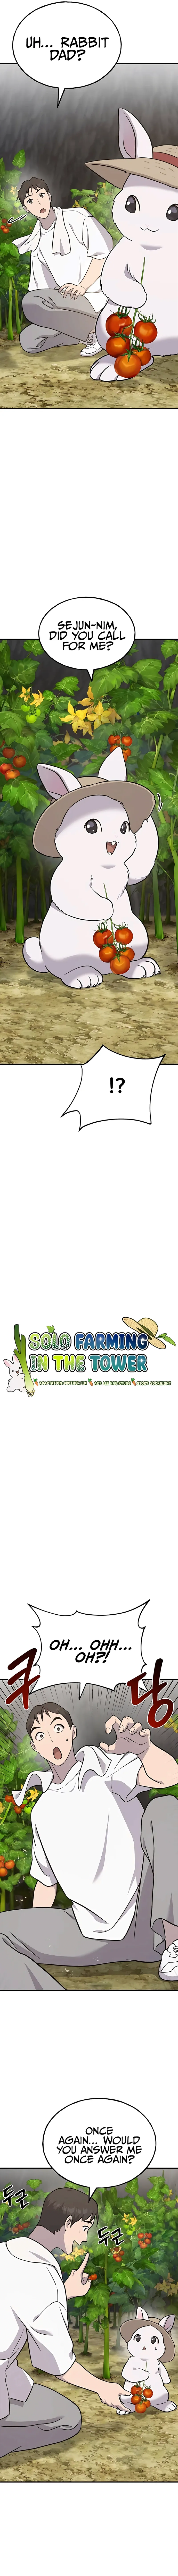 Solo Farming In The Tower Chapter 52 page 5